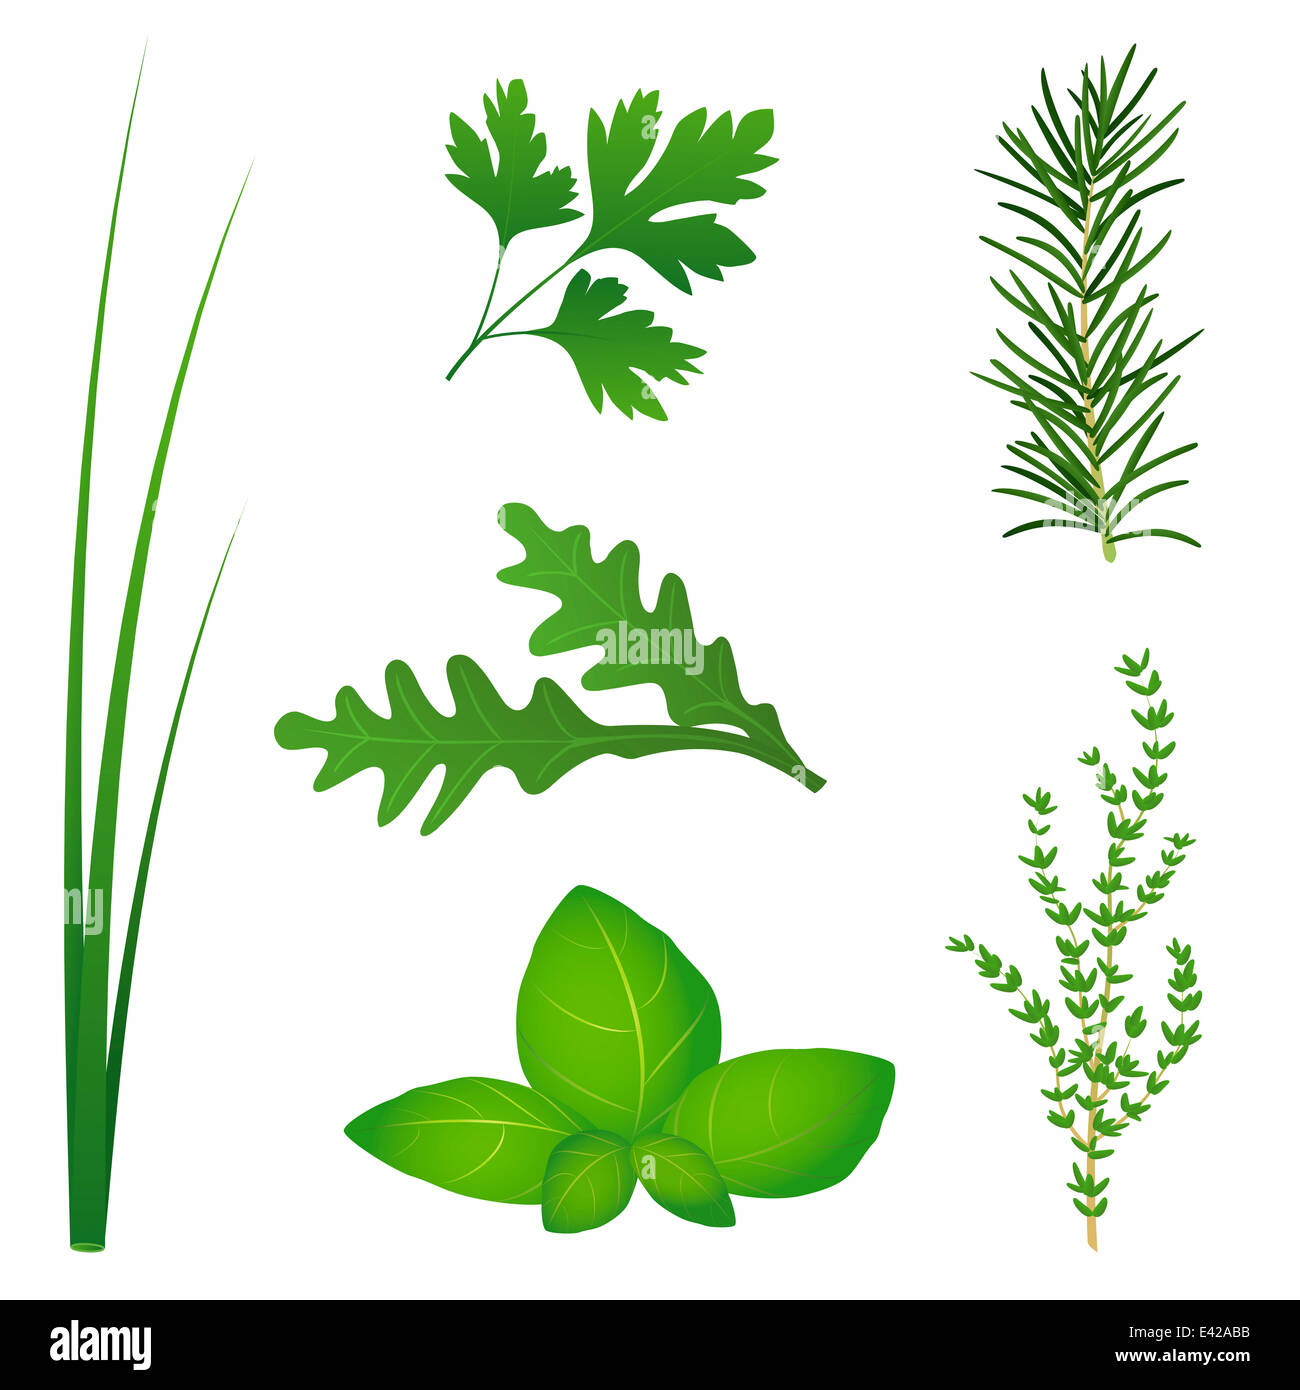 Chives, parsley, rocket, basil, rosemary and thyme, the six most popular culinary herbs for salads and cooking. Stock Photo